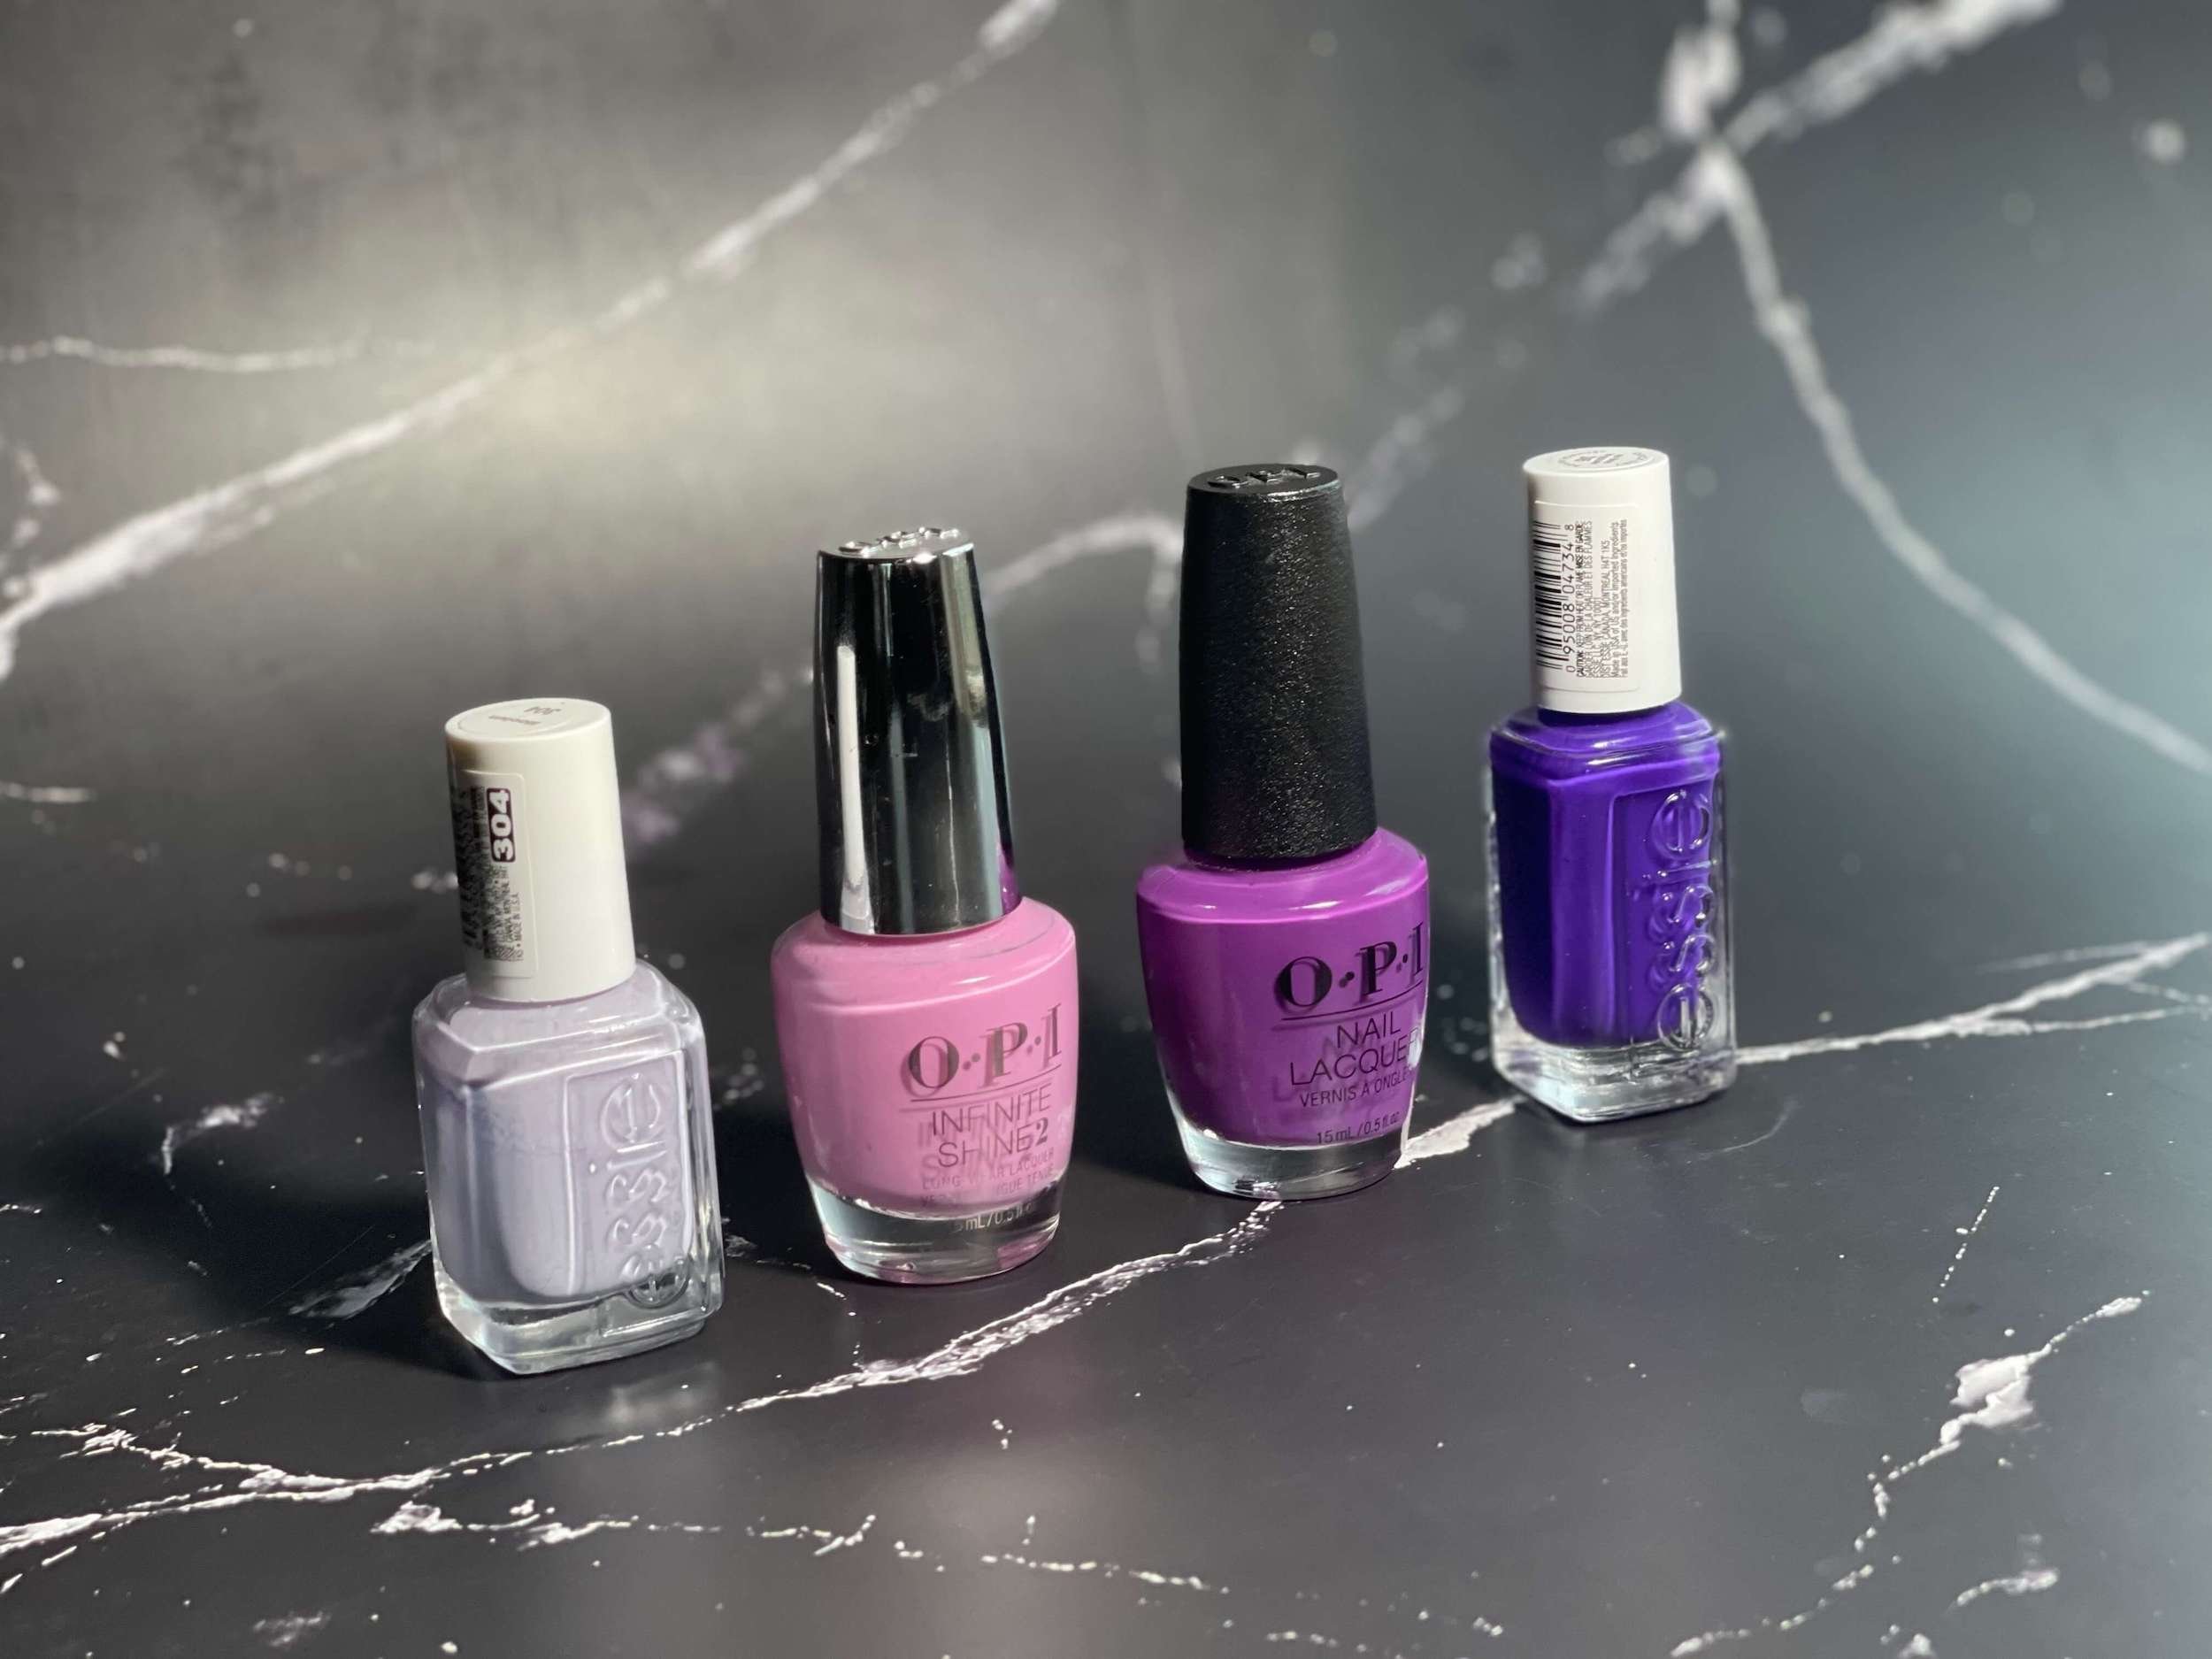 Buy SERY Colorflirt Nail Paint | Glossy, Quick Dry, High Coverage, Chip  Resistant, Long Lasting | Nail Polish for Women | Lavender, Purple - 10 ML  Online at Low Prices in India - Amazon.in